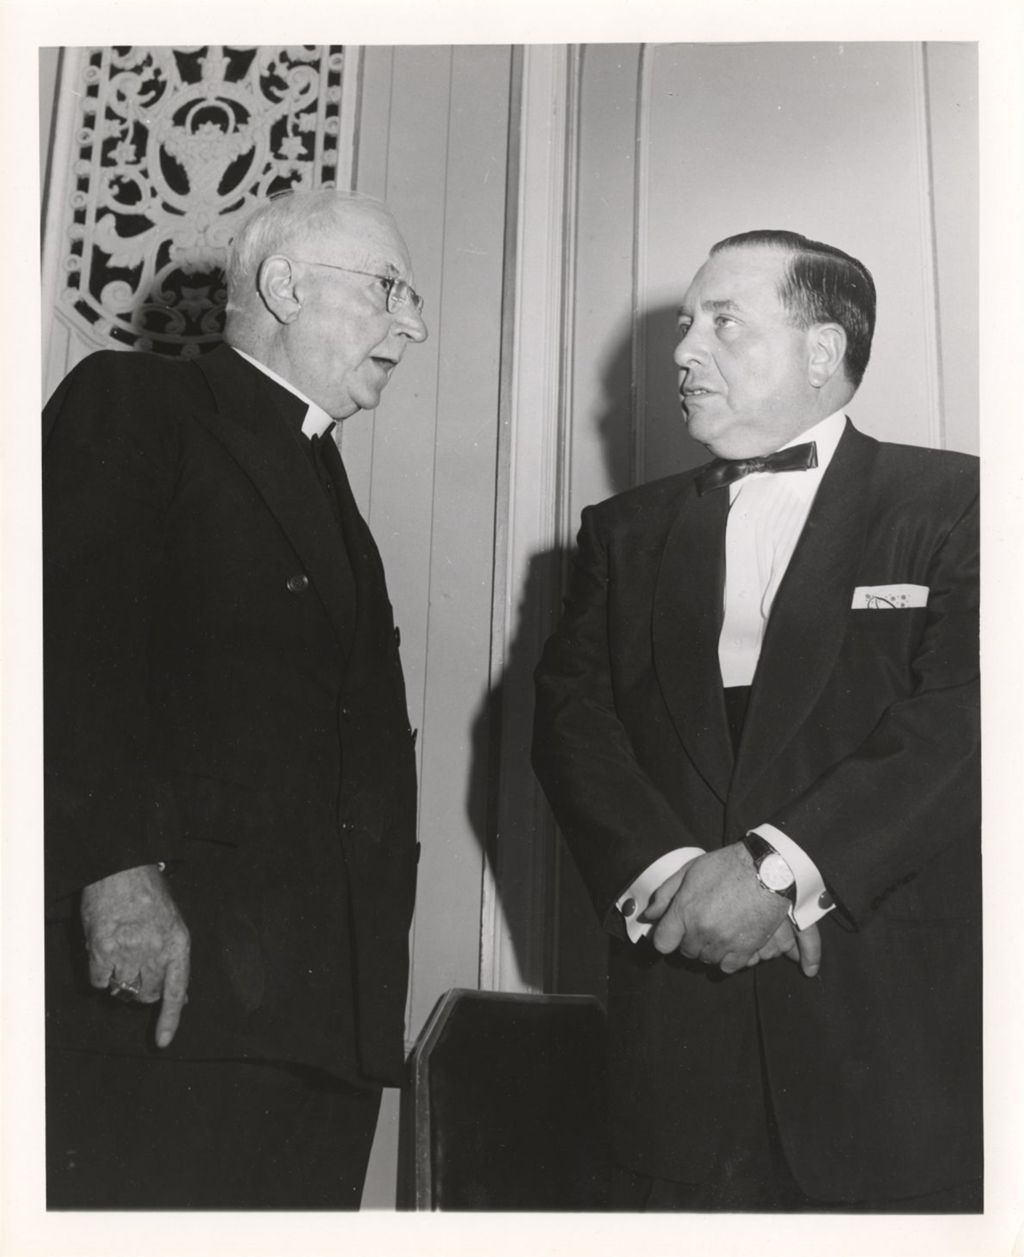 Miniature of Irish Fellowship Club of Chicago 56th annual St. Patrick's Day Banquet, Richard J. Daley and Cardinal Stritch